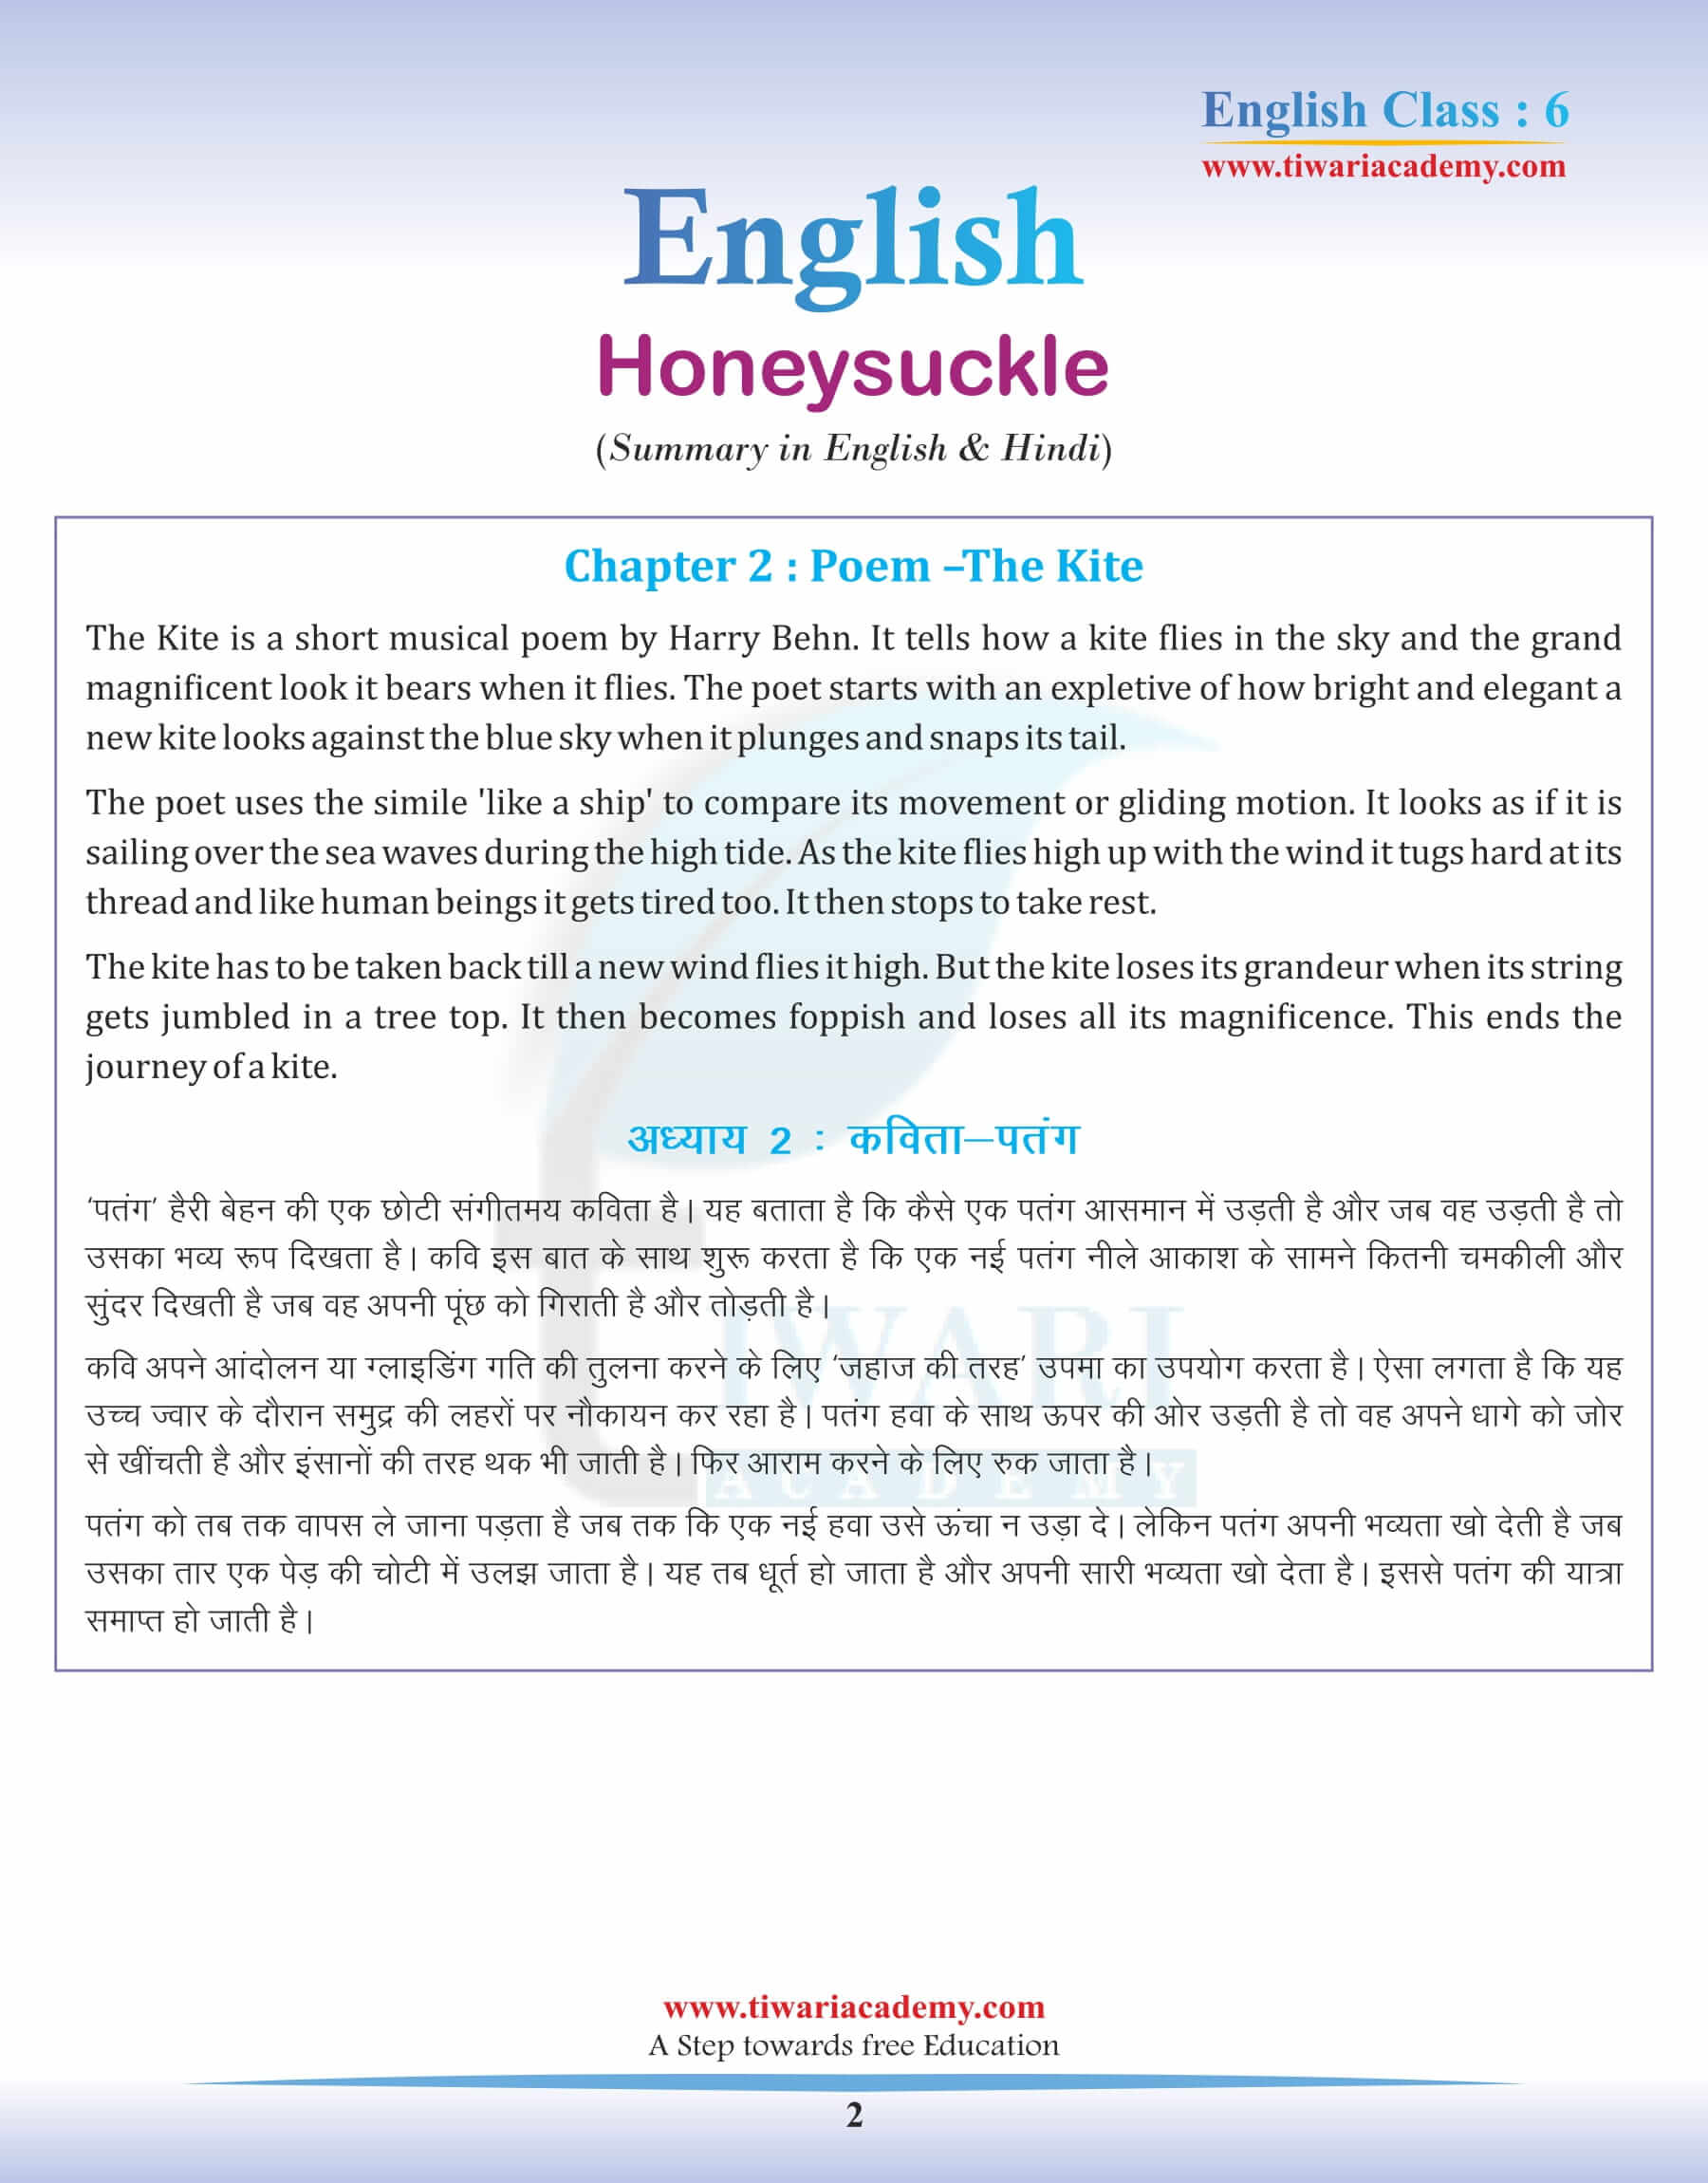 Class 6 English Chapter 2 Poem Summary in Hindi and English